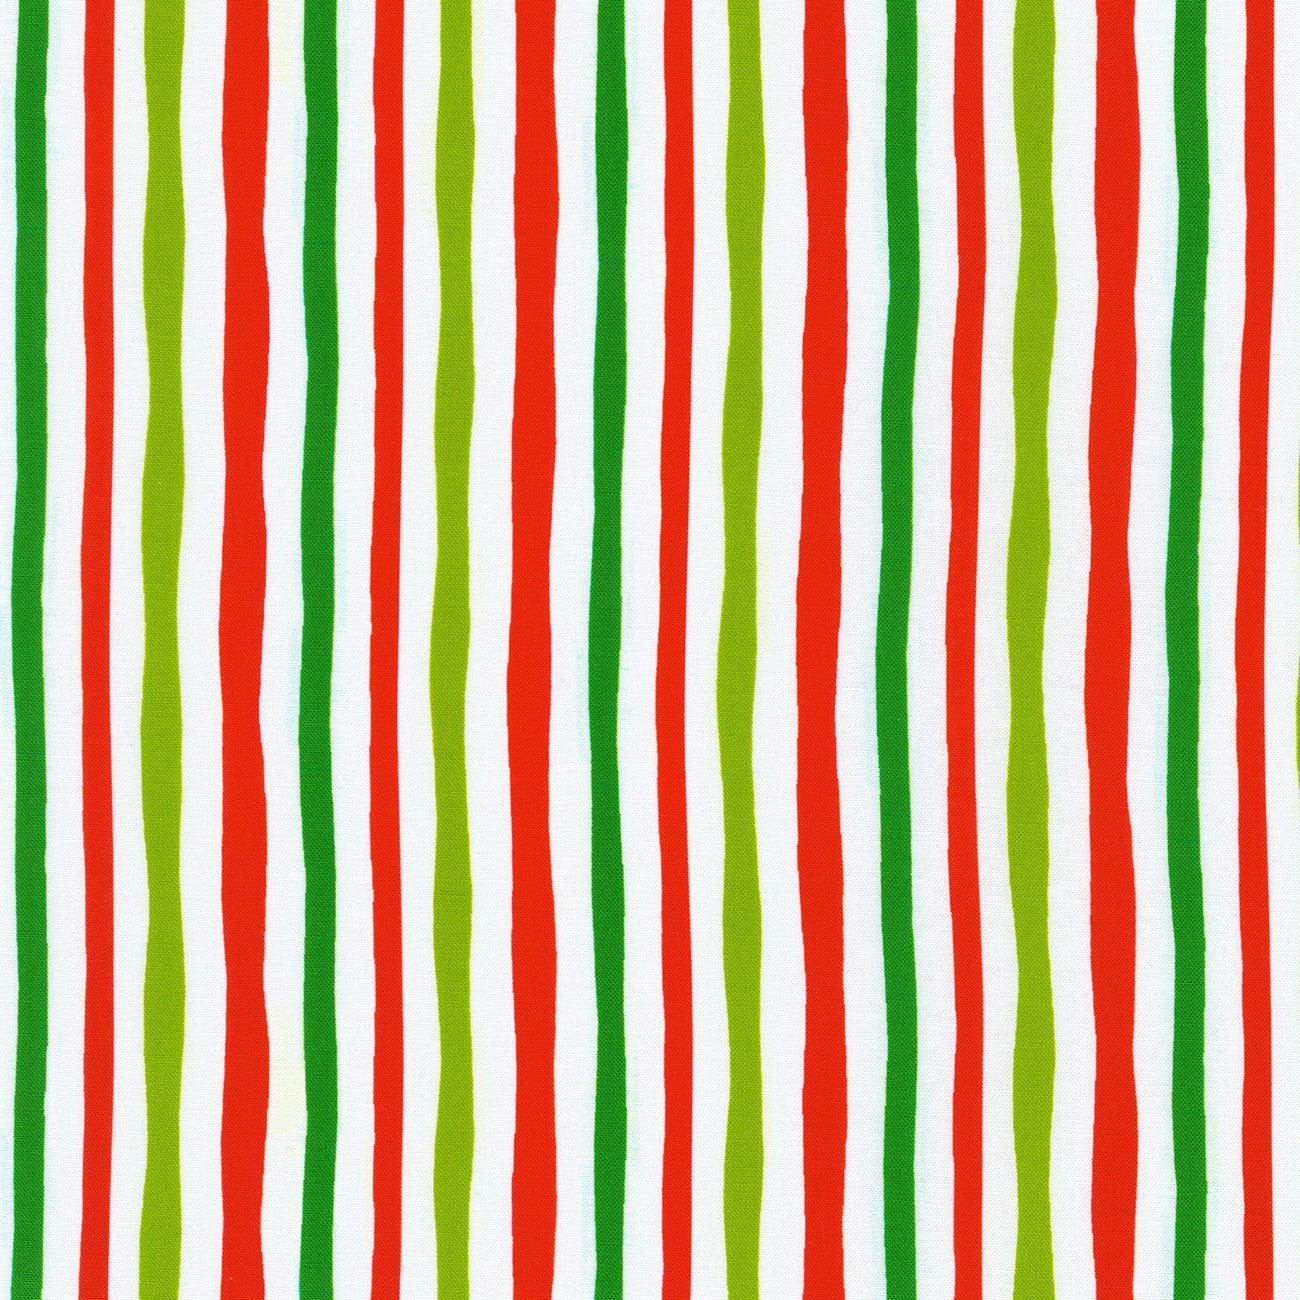 How the Grinch Stole Christmas Multi Stripes Fabric